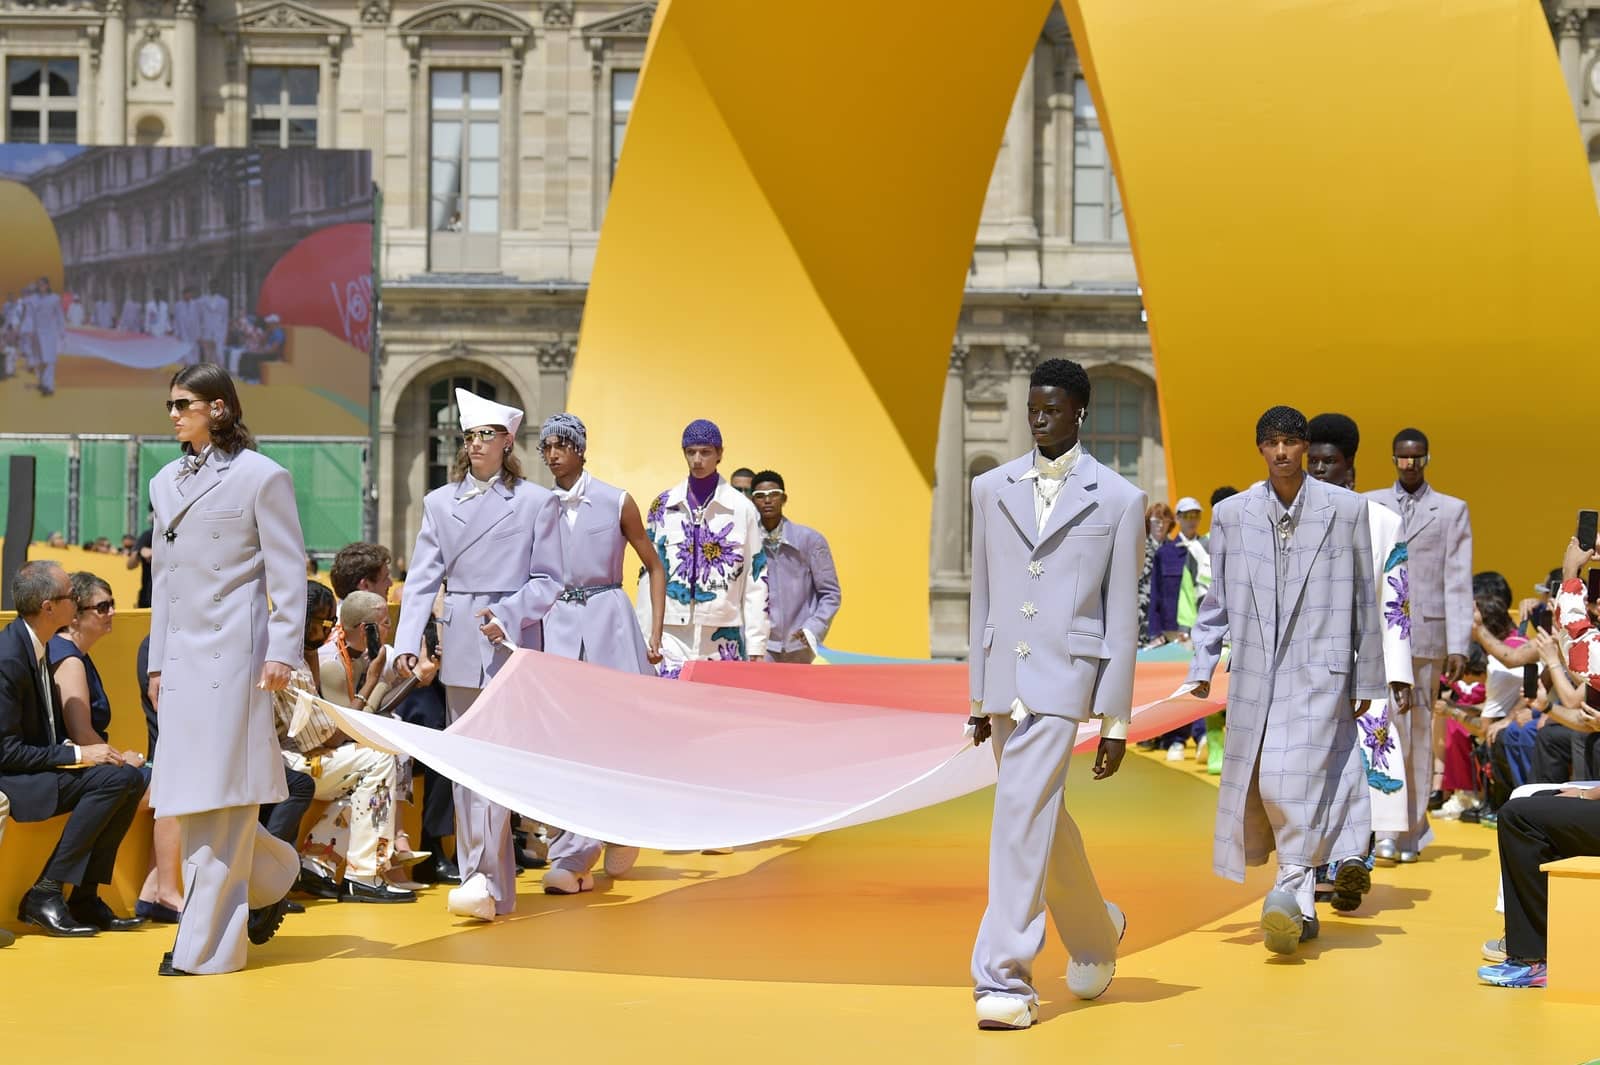 Back to childhood for the Louis Vuitton spring-summer 2023 men's show